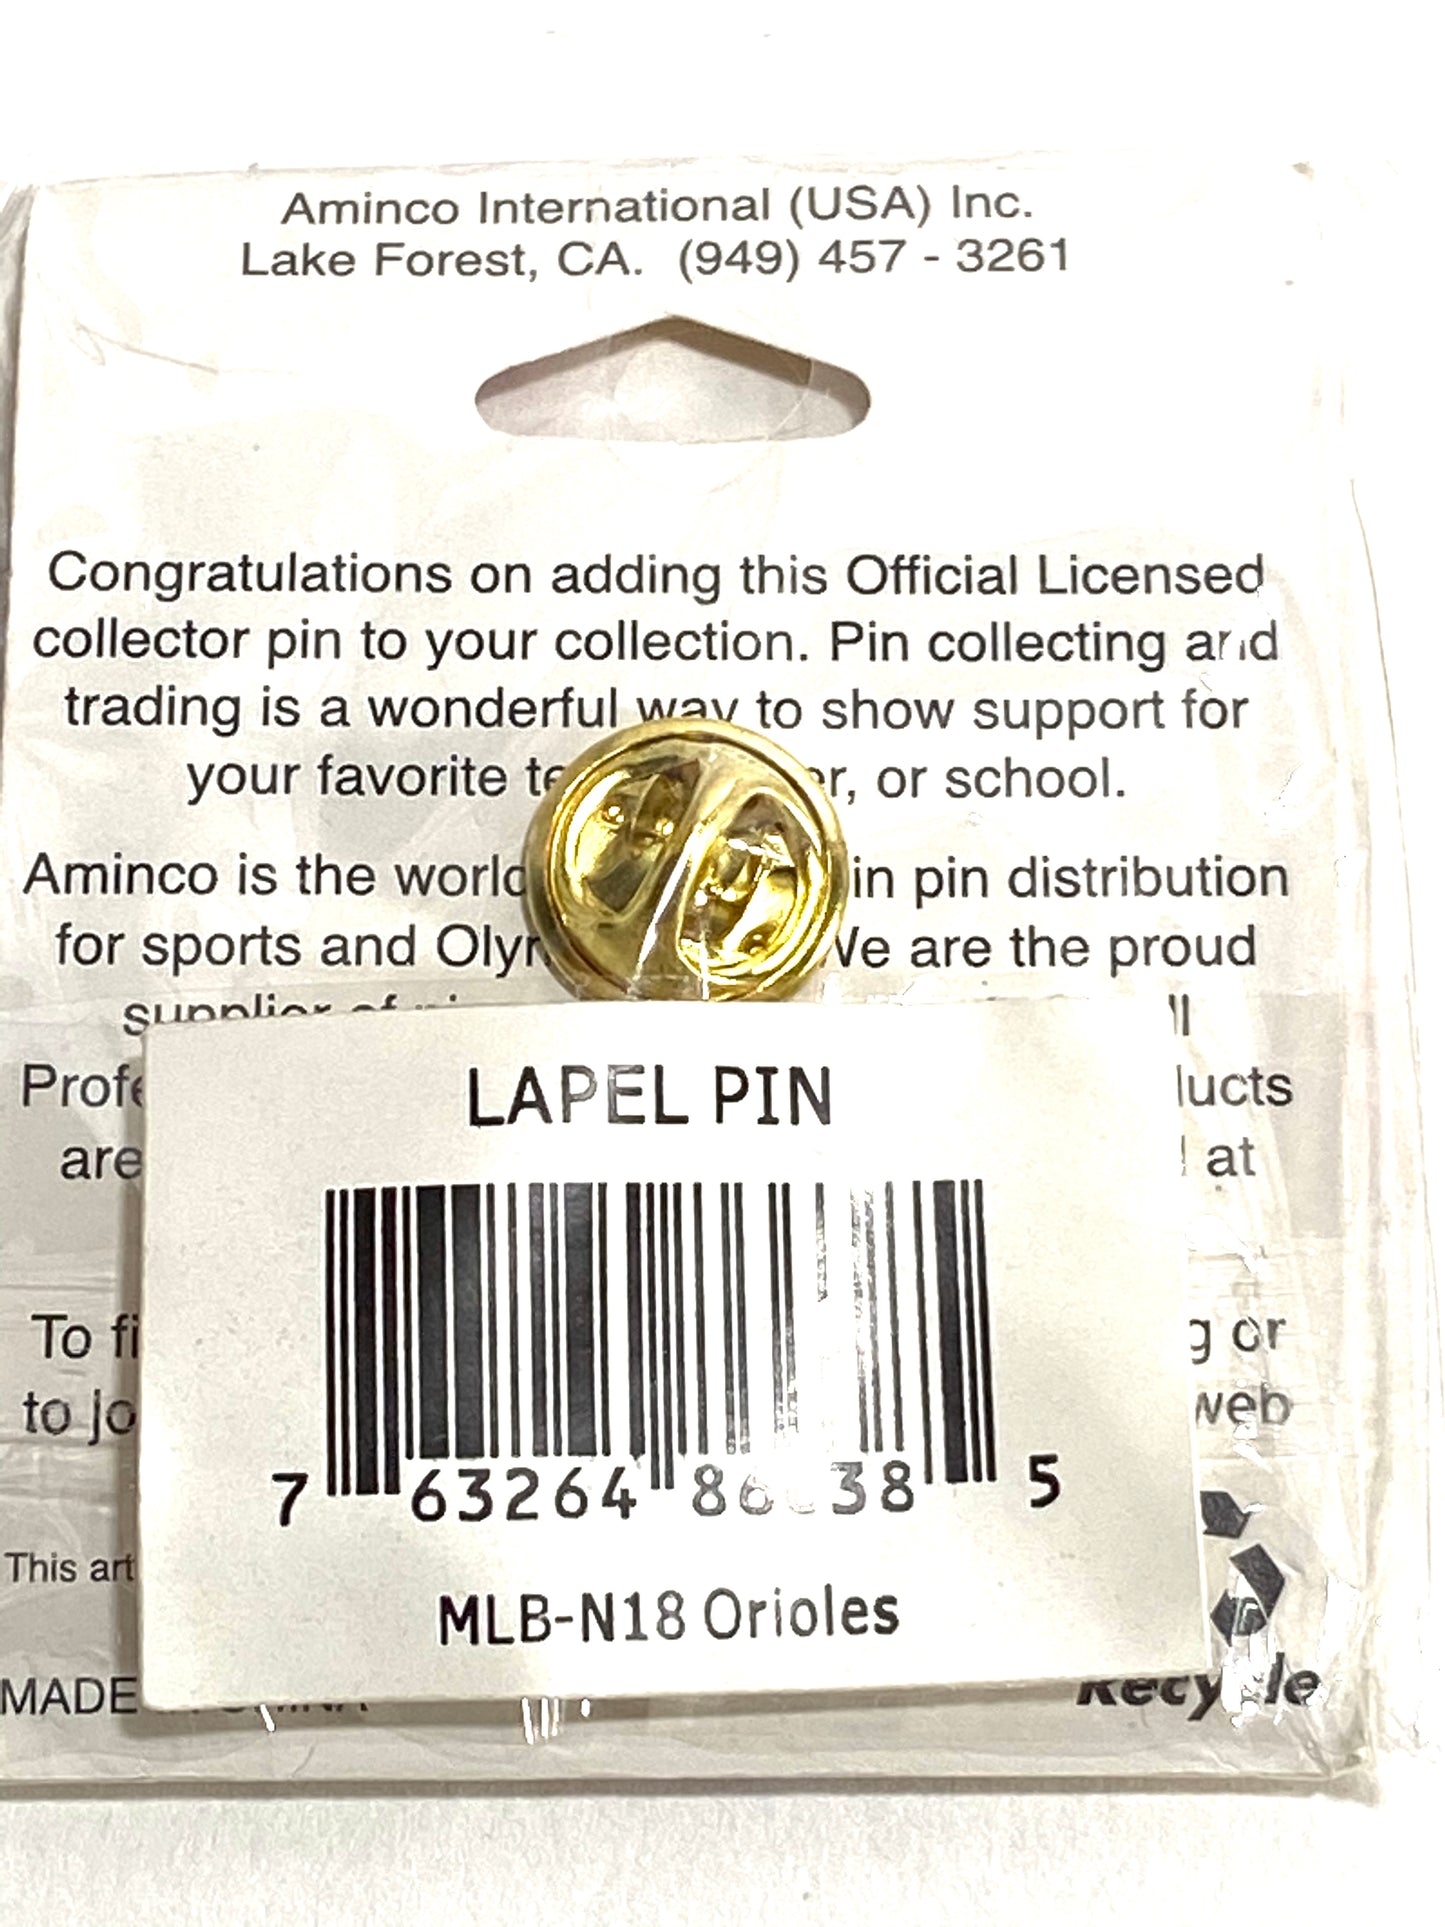 Baltimore Orioles Vintage Late '90's MLB "Diamond" Lapel Pin By Aminco